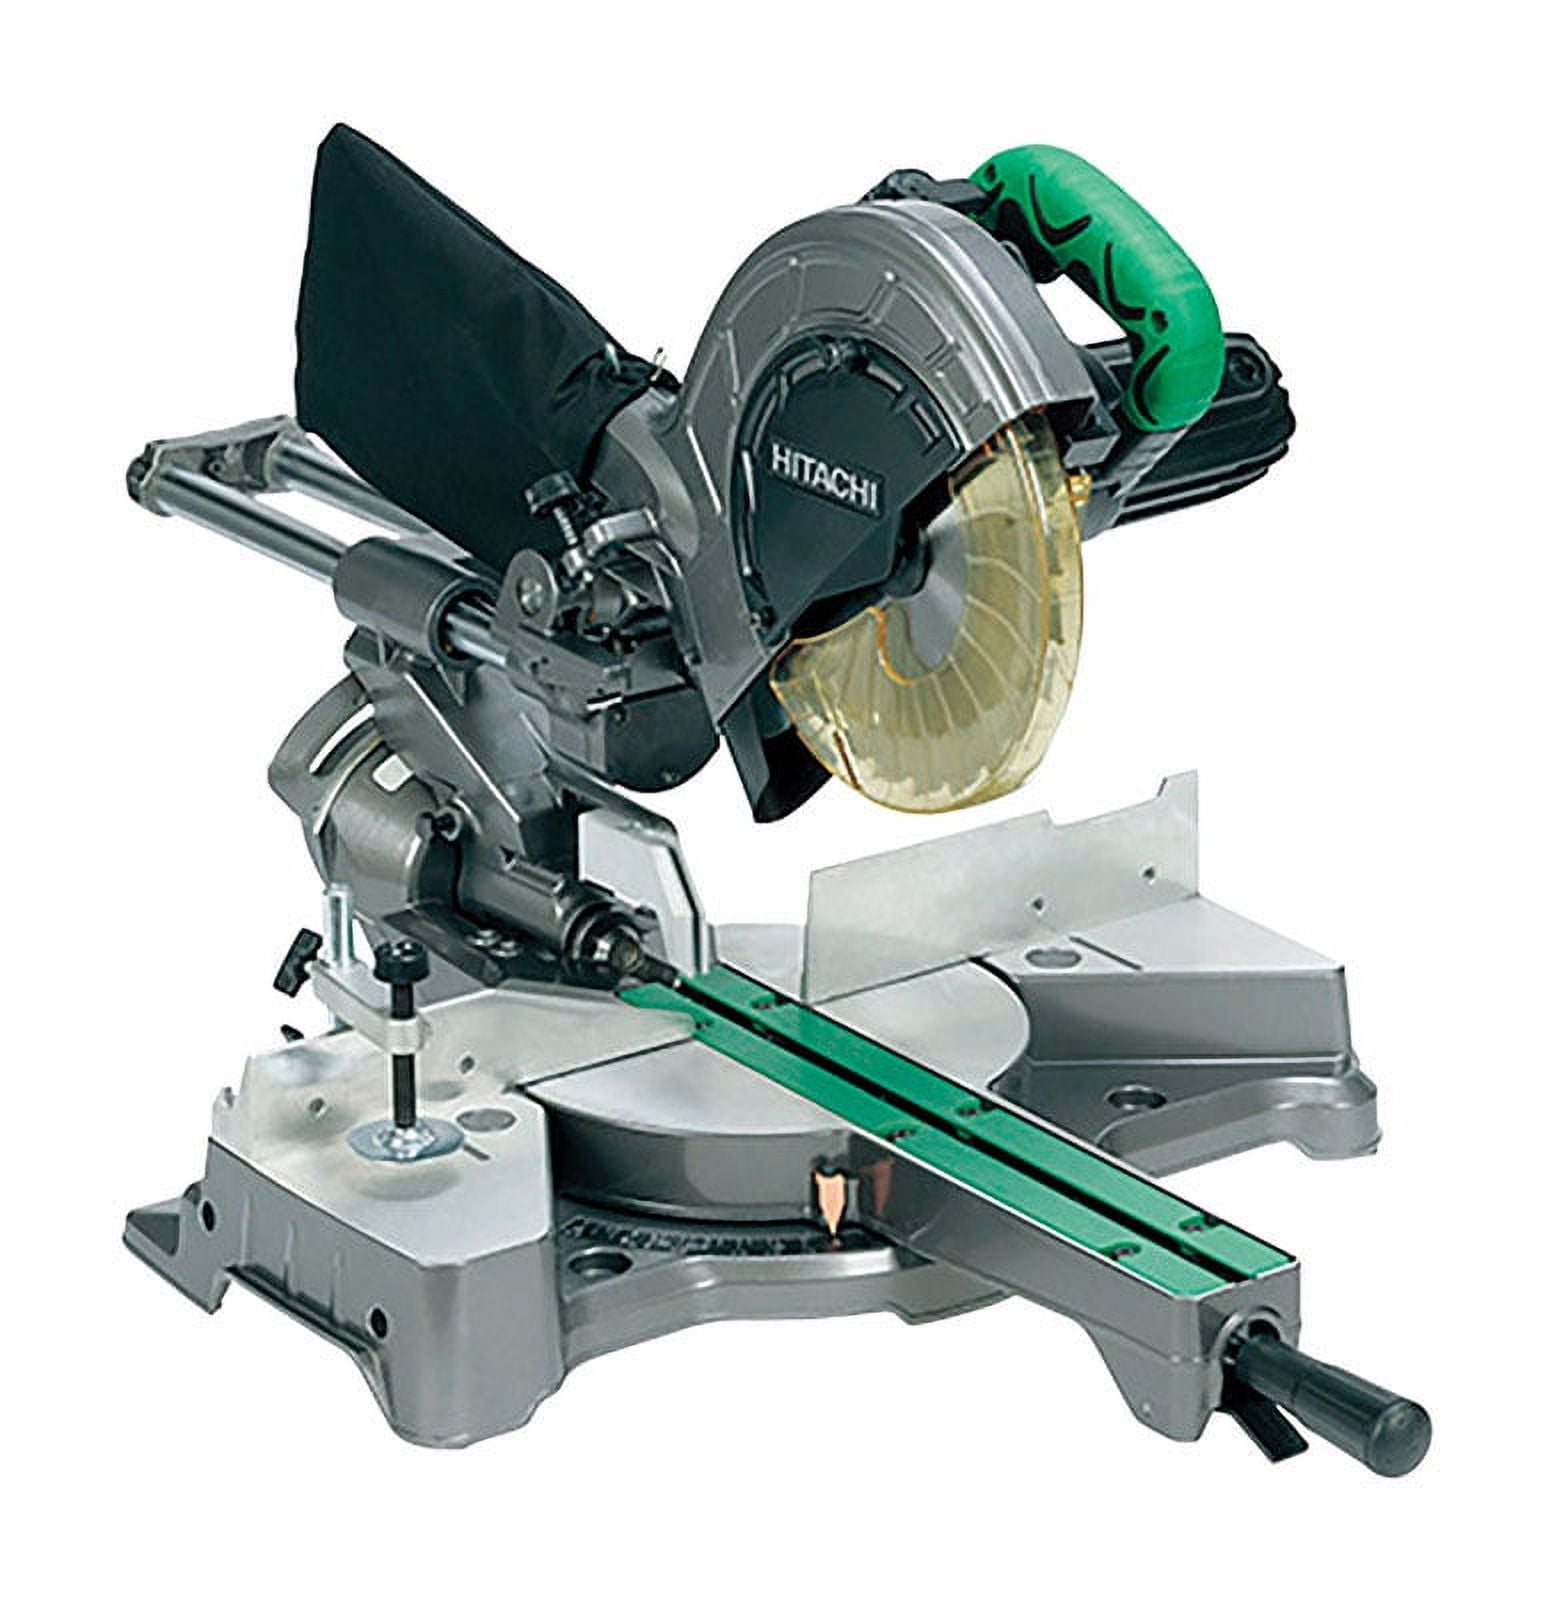 Metabo HPT 8-1/2-Inch Compound Miter Saw 120-Volt 9.2-Amps 5500